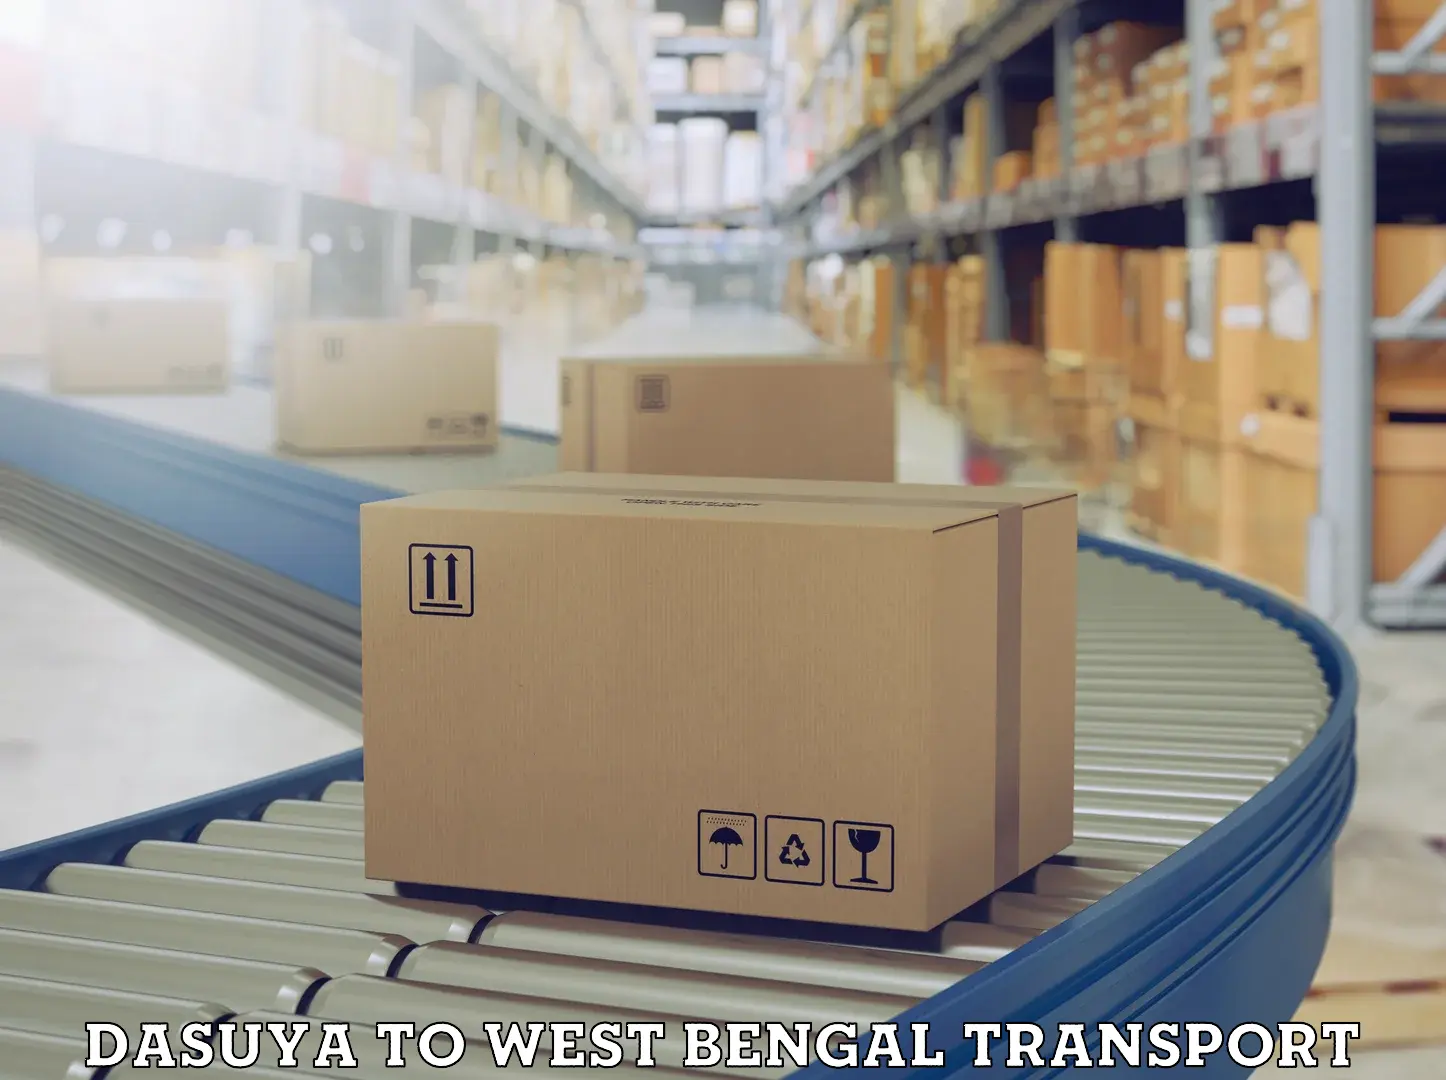 Daily transport service Dasuya to West Bengal